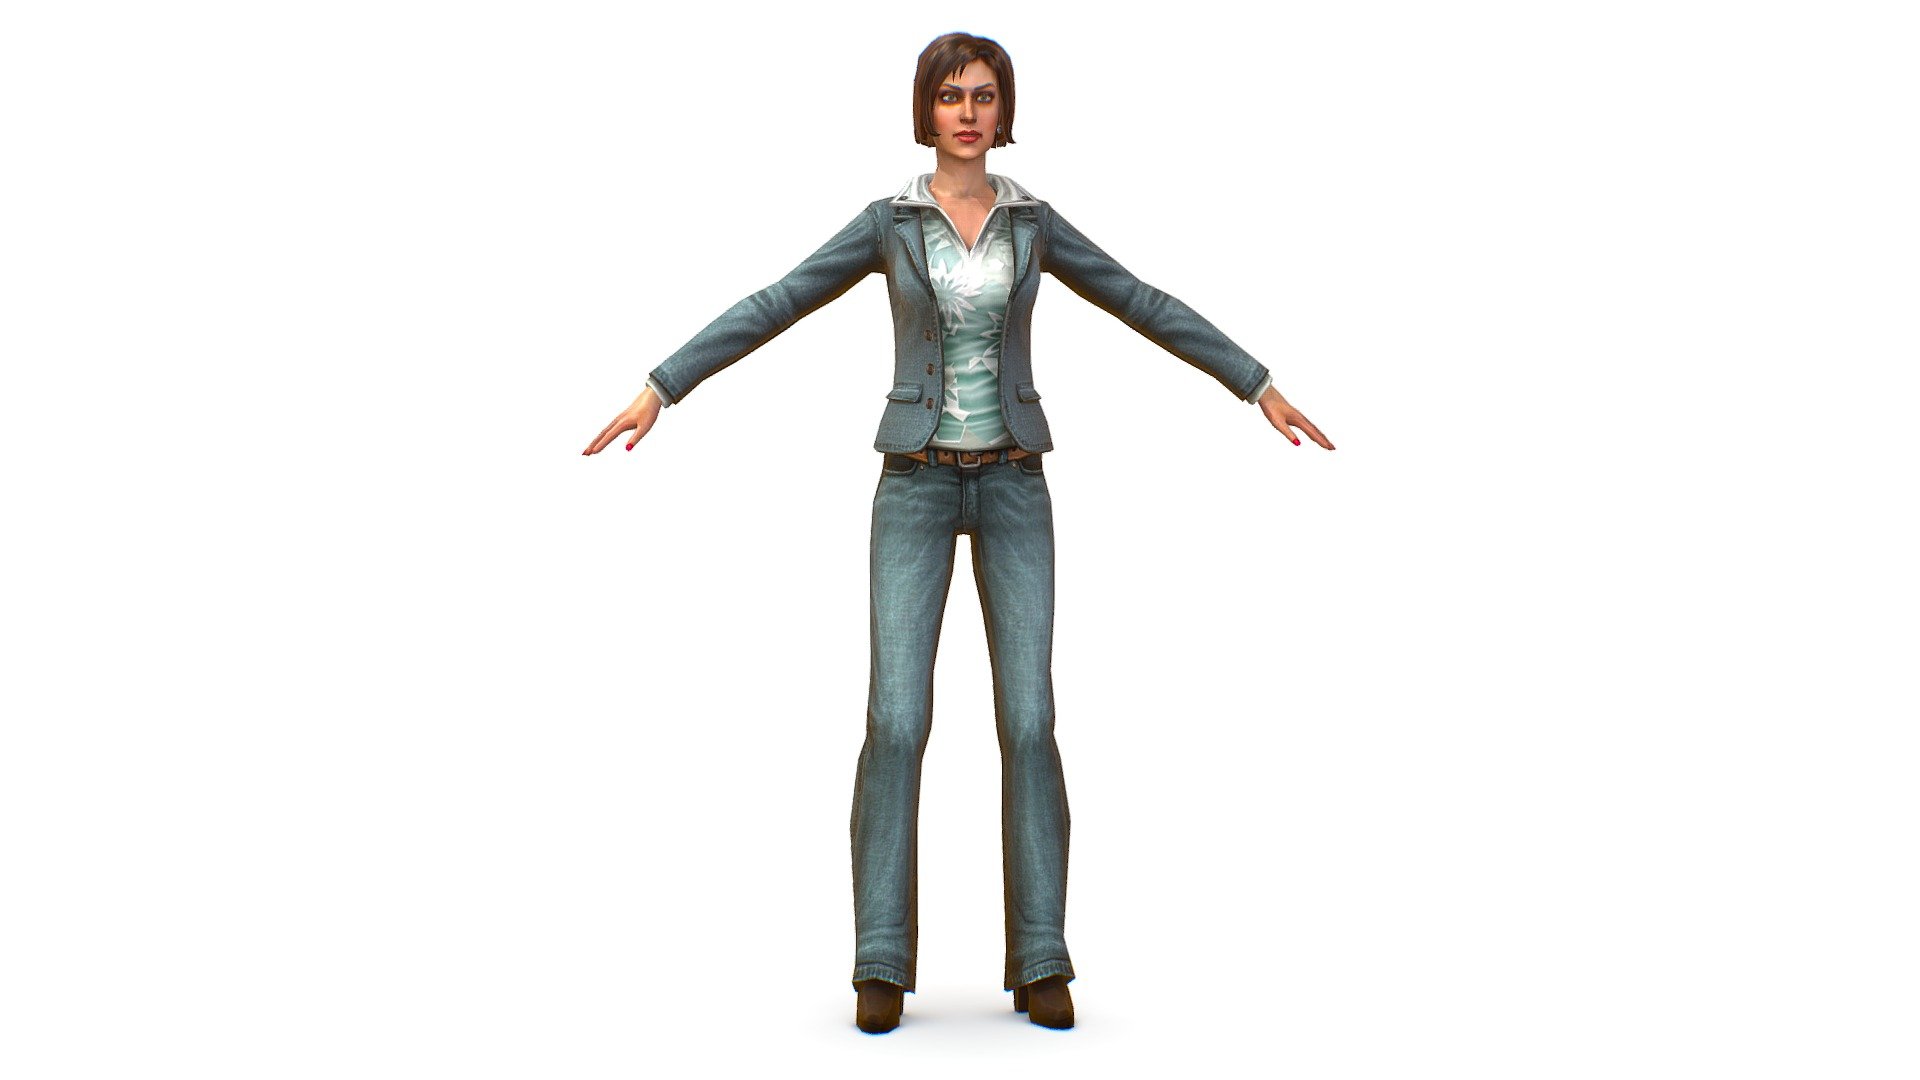 A young girl in a jeans shirt and jacket - 3dsMax file included/ texture 512 color only, head and body 3d model